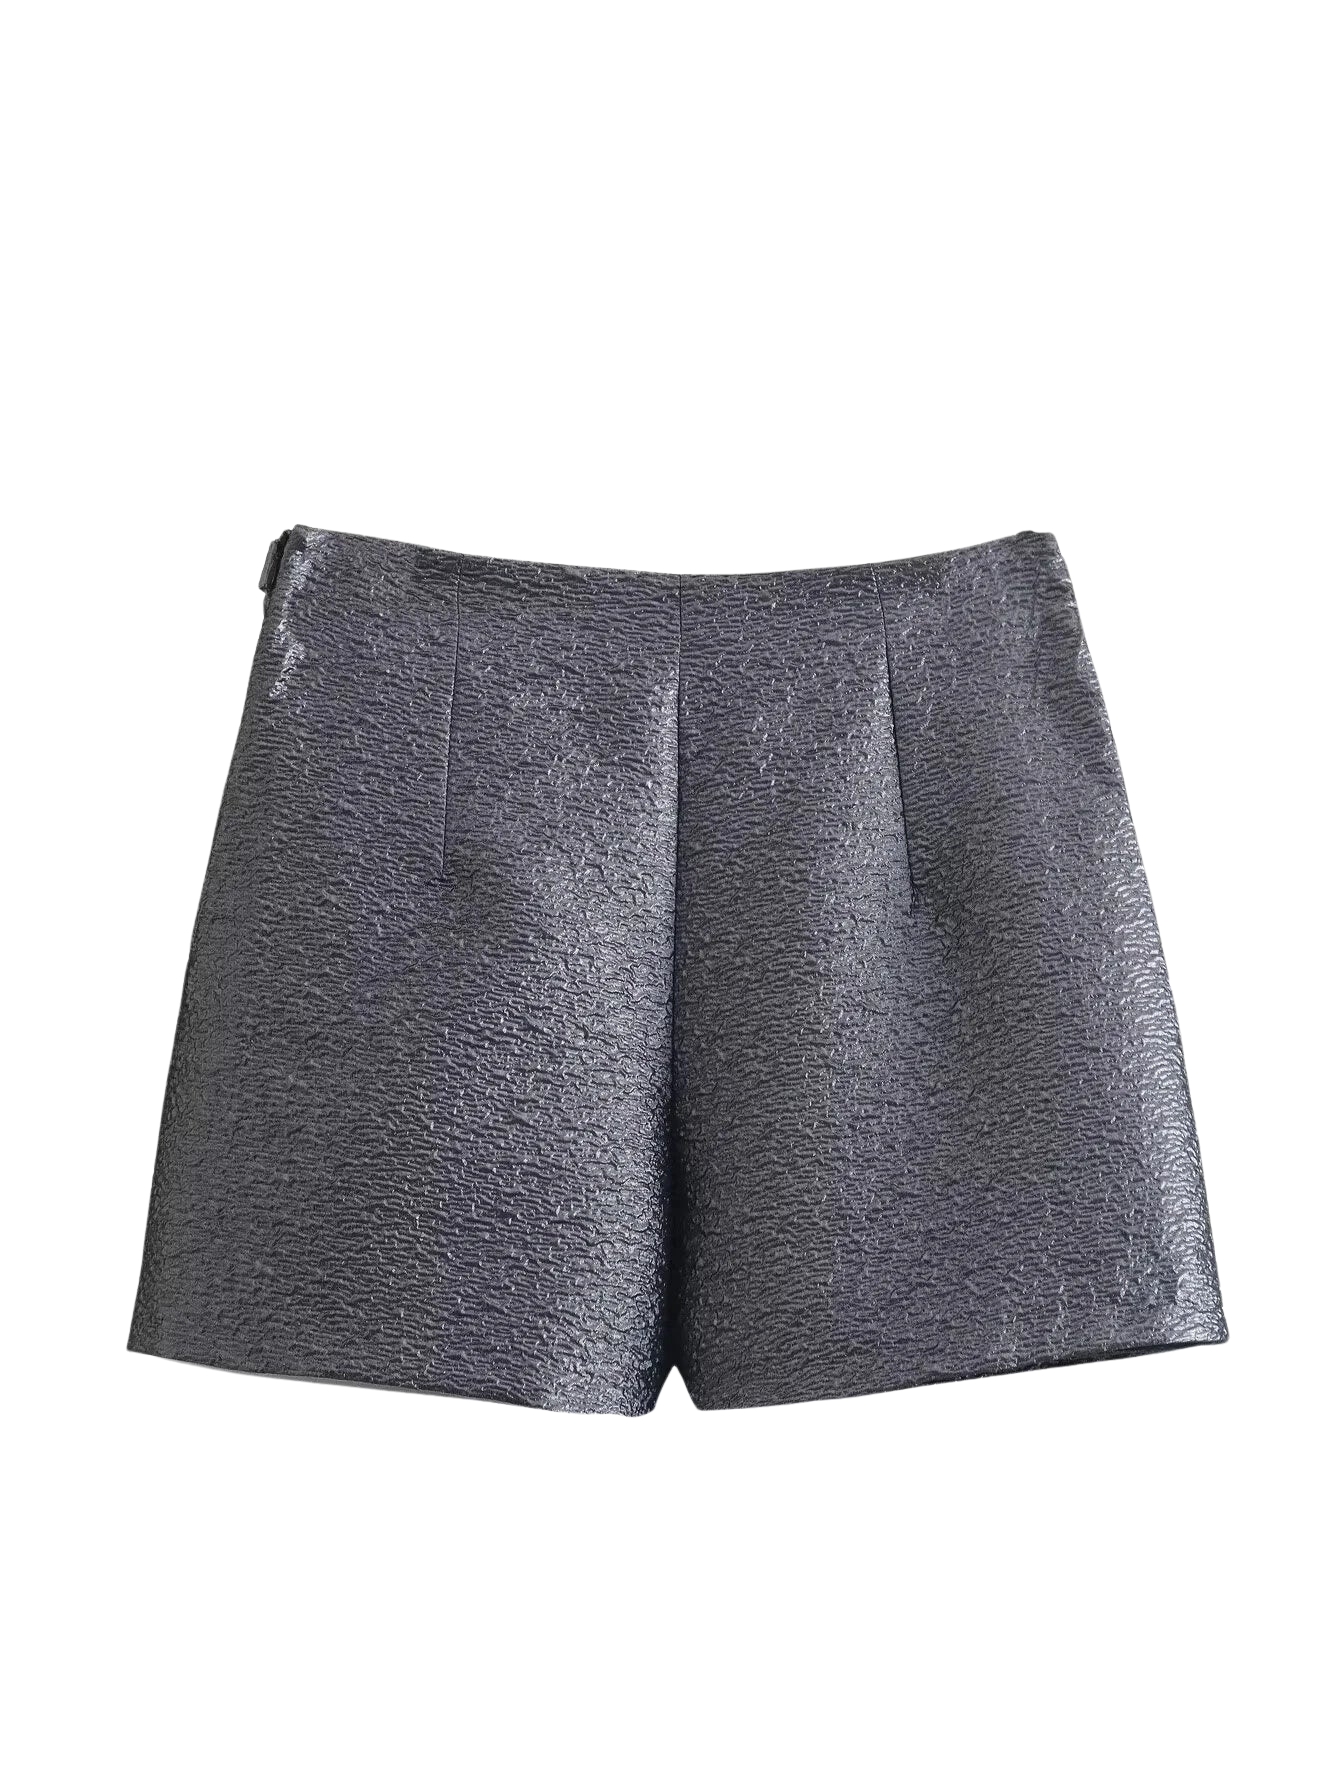 A&A Luxe Chic Party Bow Skort